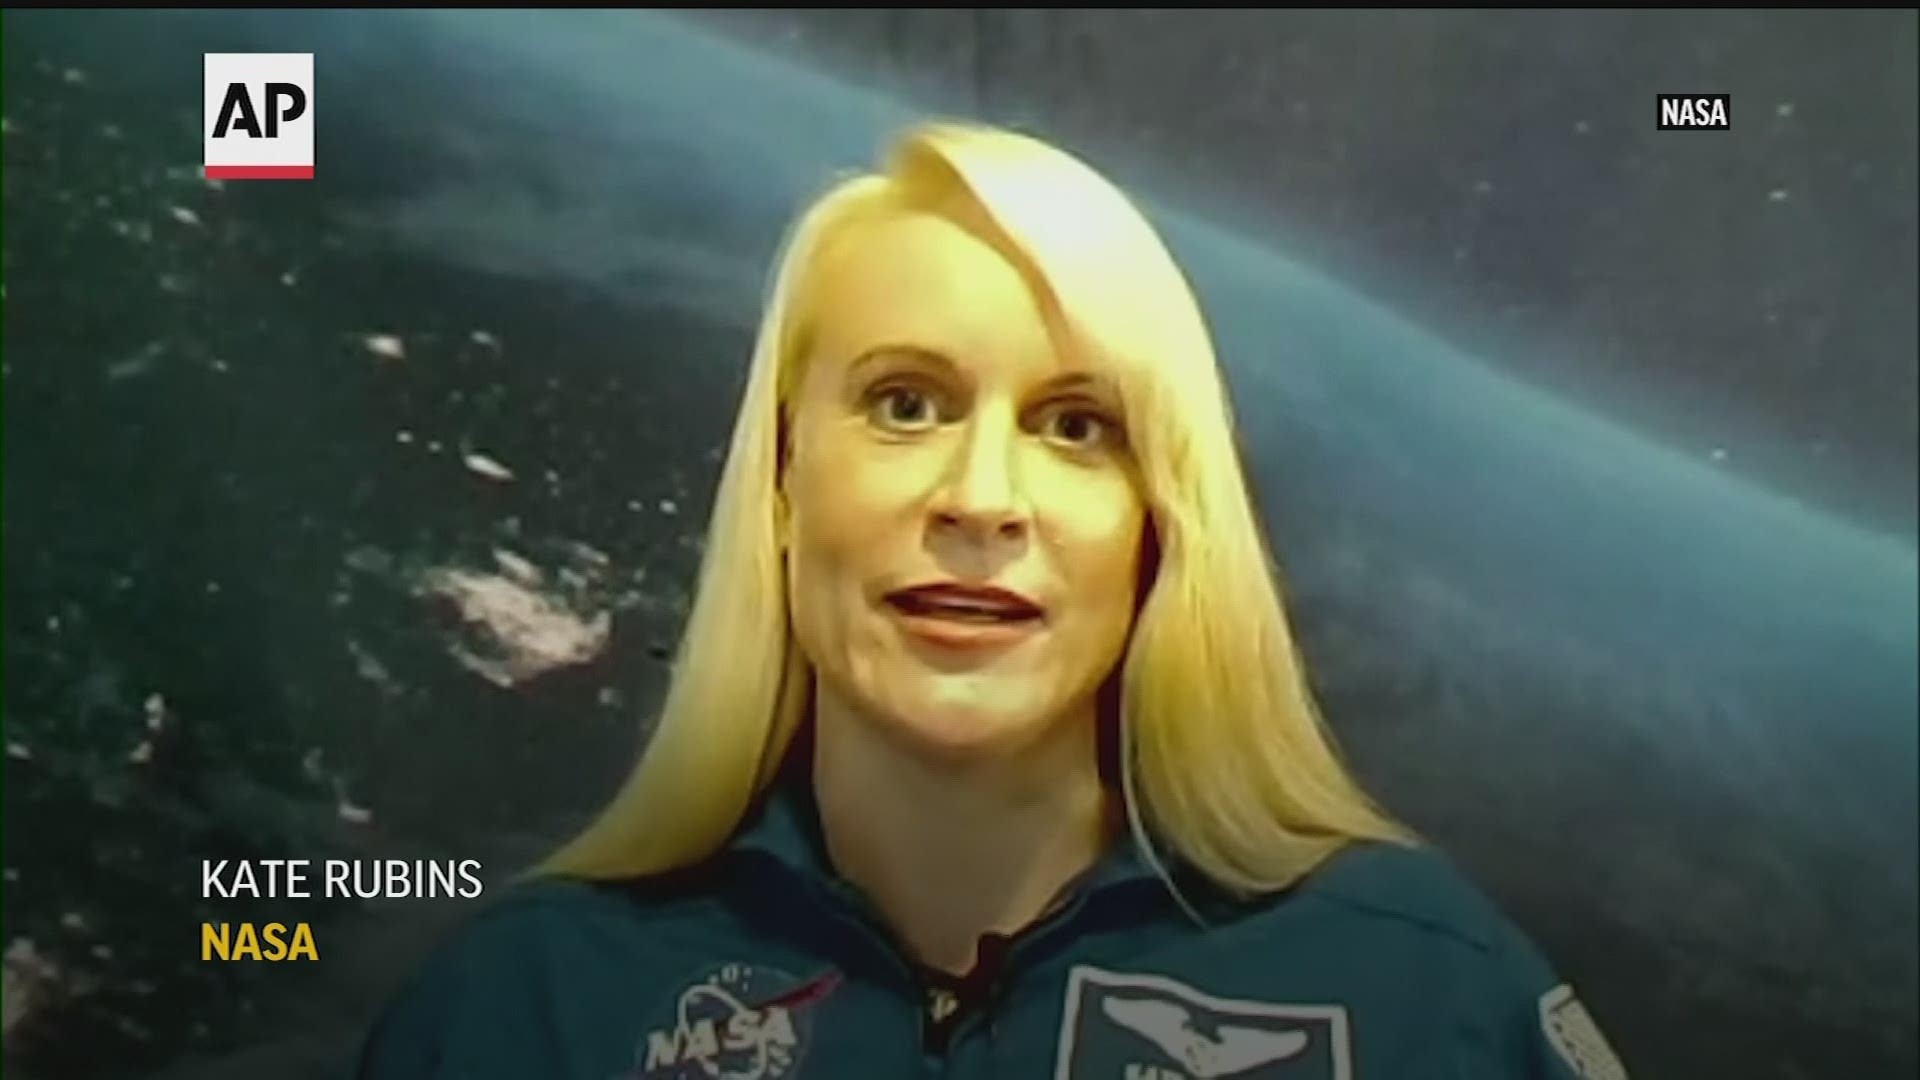 NASA astronaut Kate Rubins told The Associated Press on Friday that she plans to cast her next vote from space – more than 200 miles above Earth.